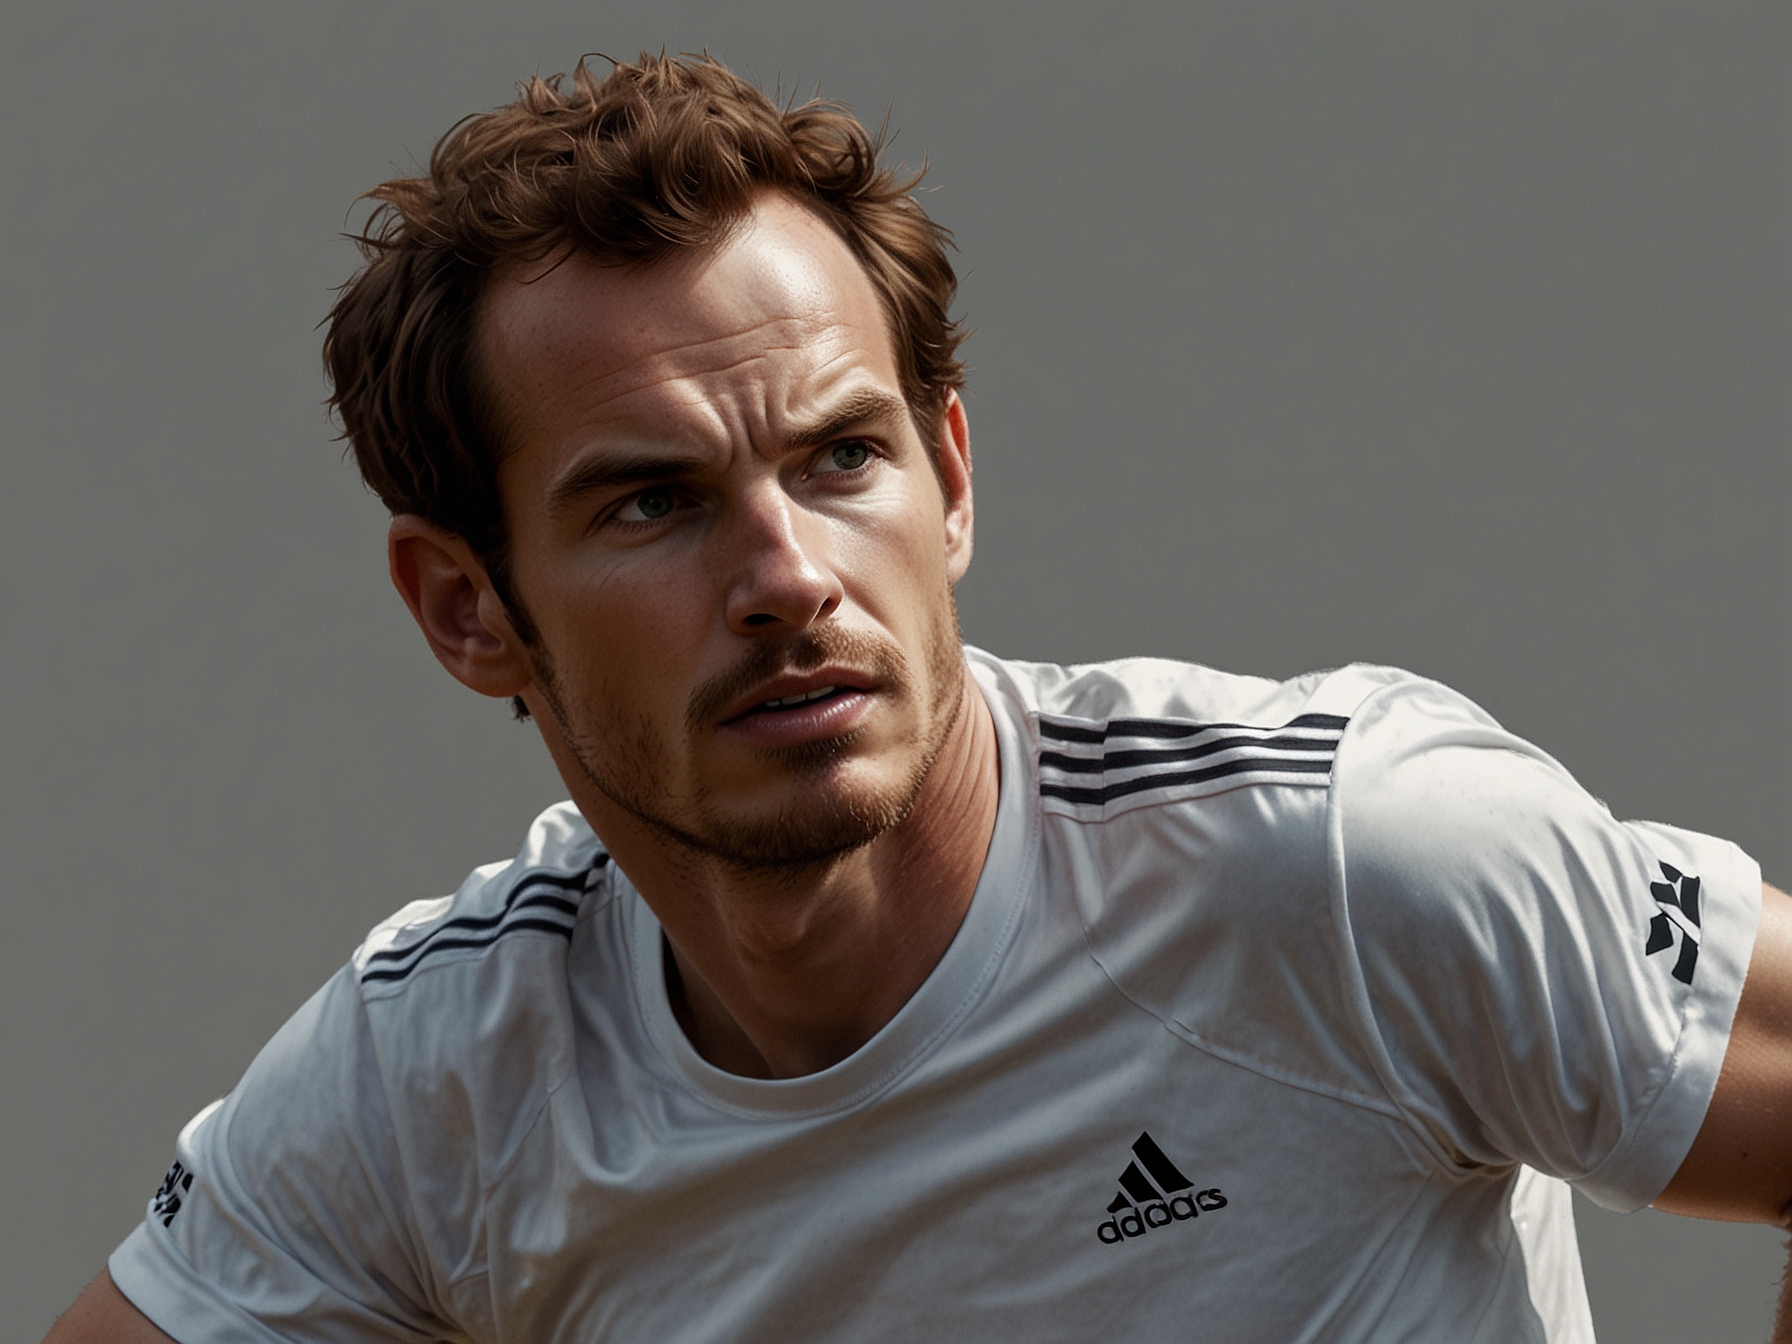 Andy Murray during a practice session, focused and determined, illustrating his remarkable comeback after hip resurfacing surgery.